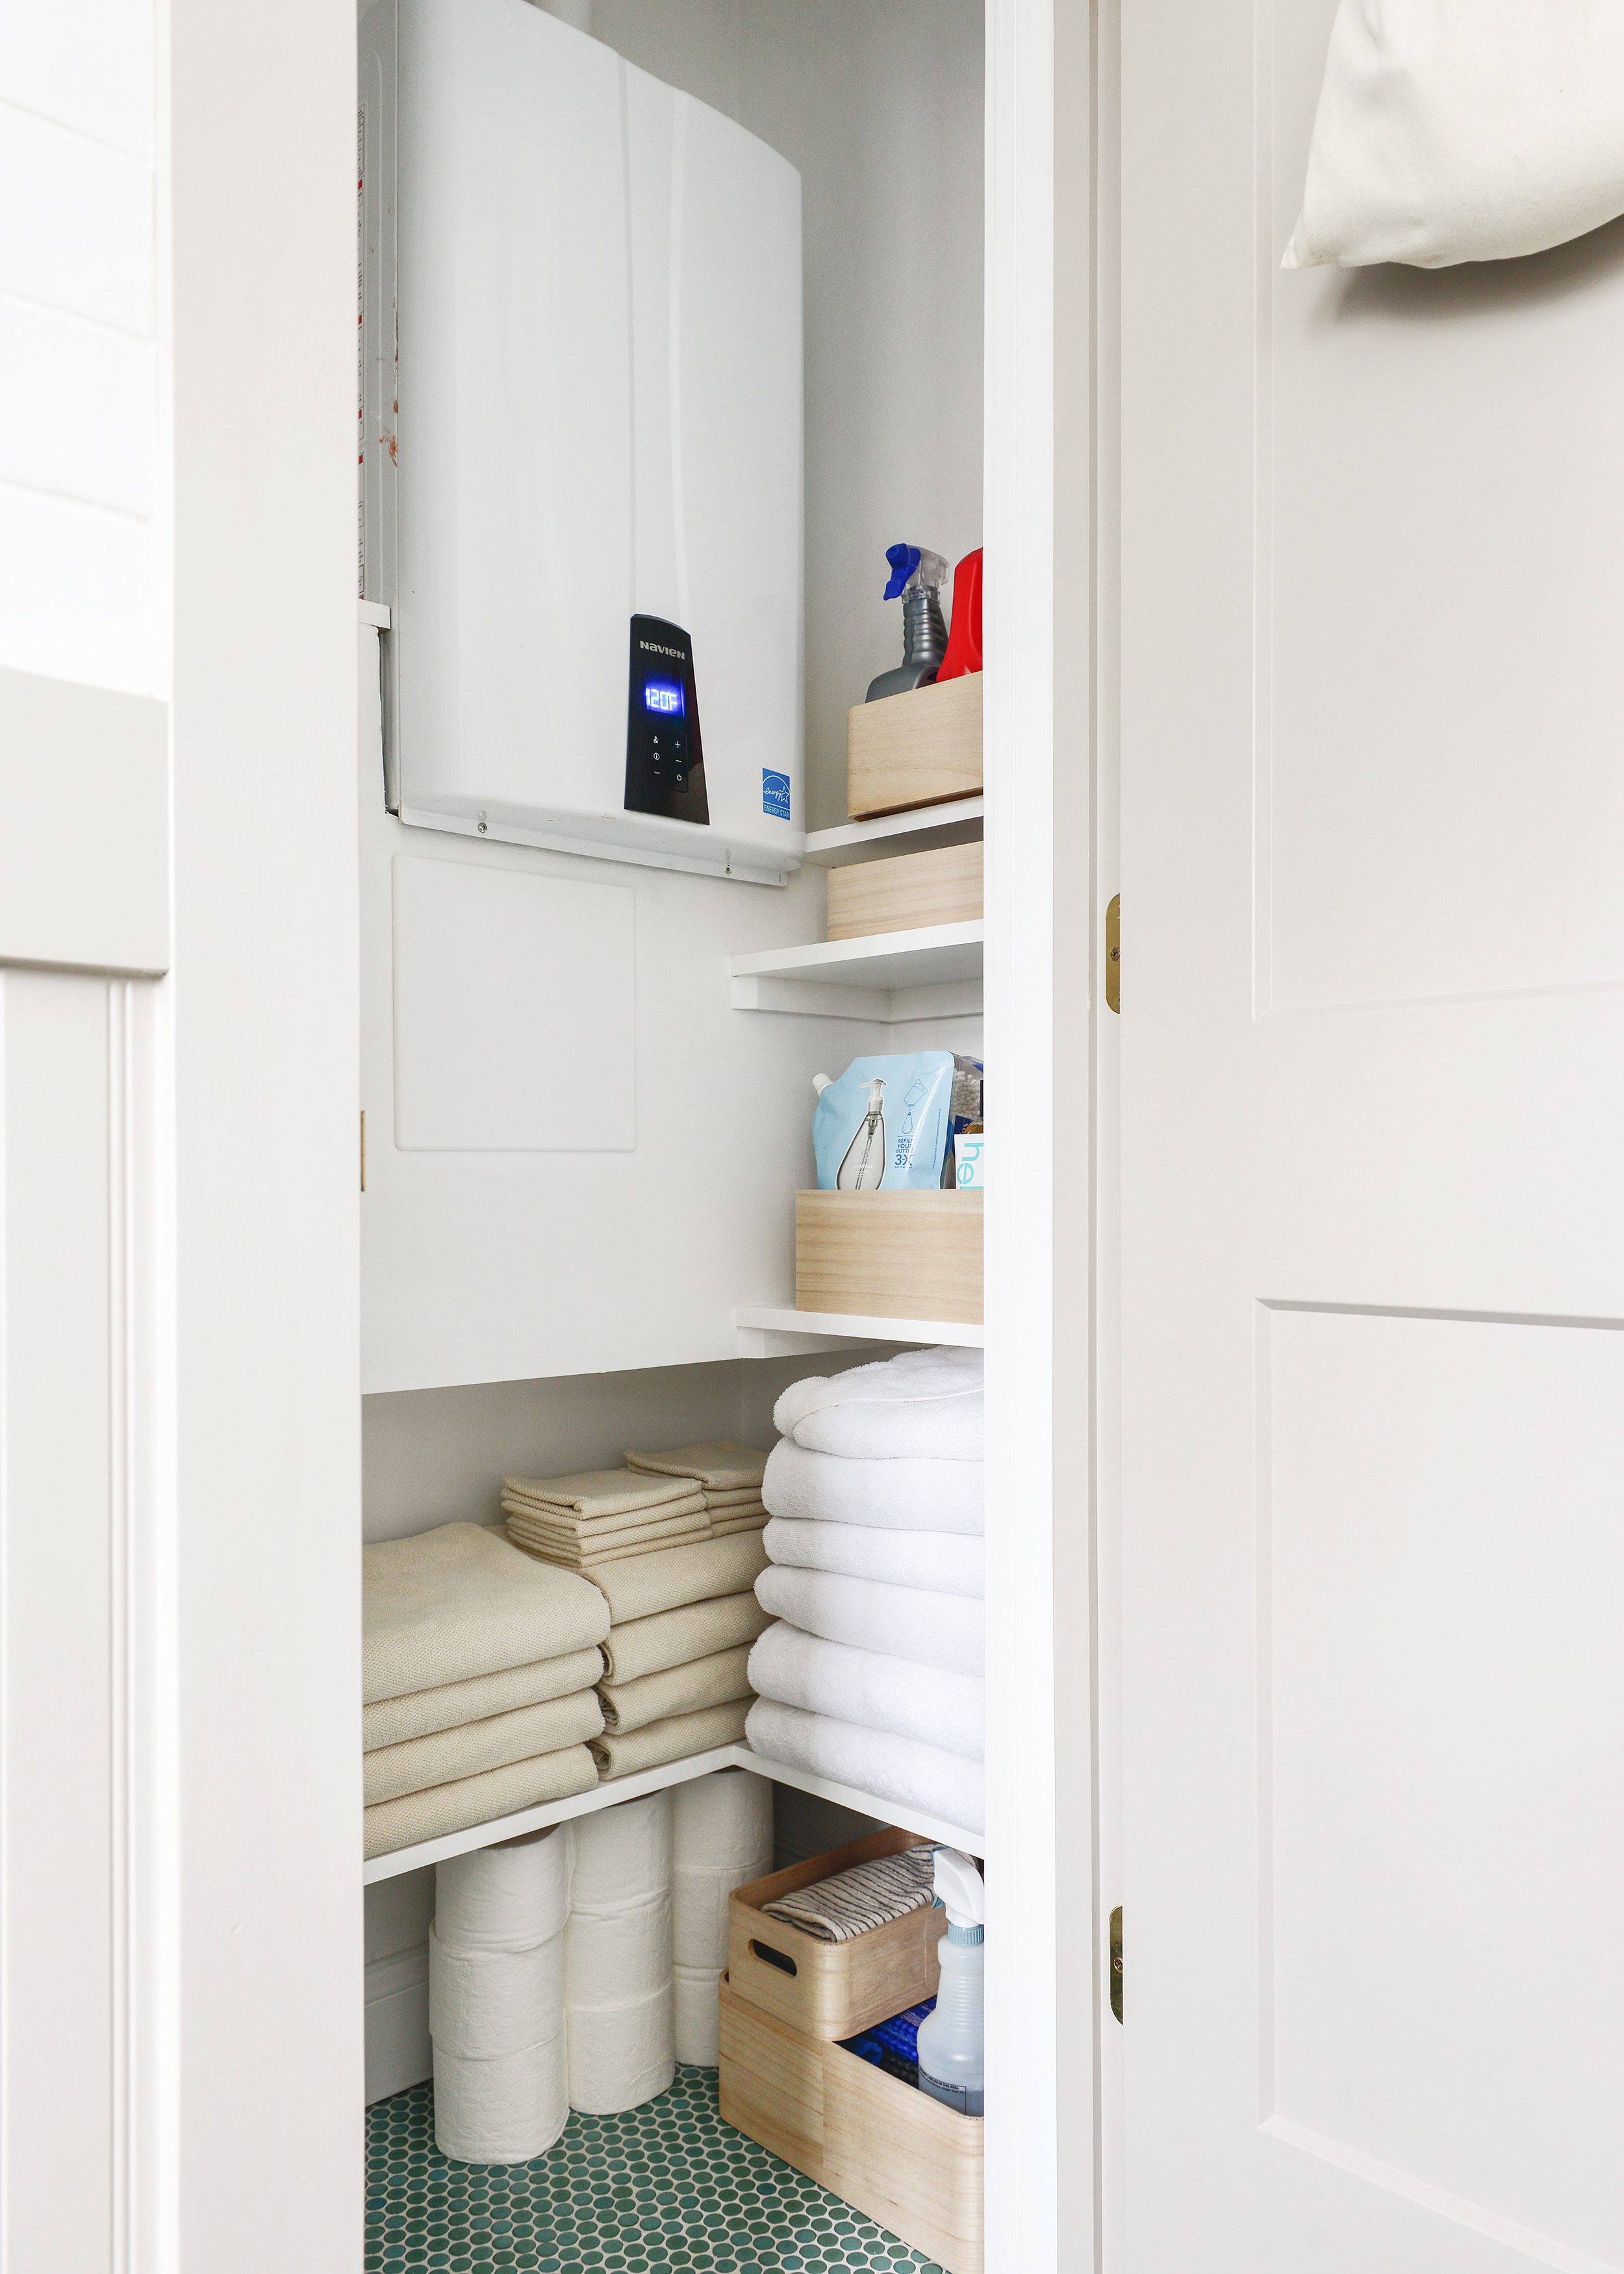 Finding Functional Storage Space In an Awkward Linen Closet